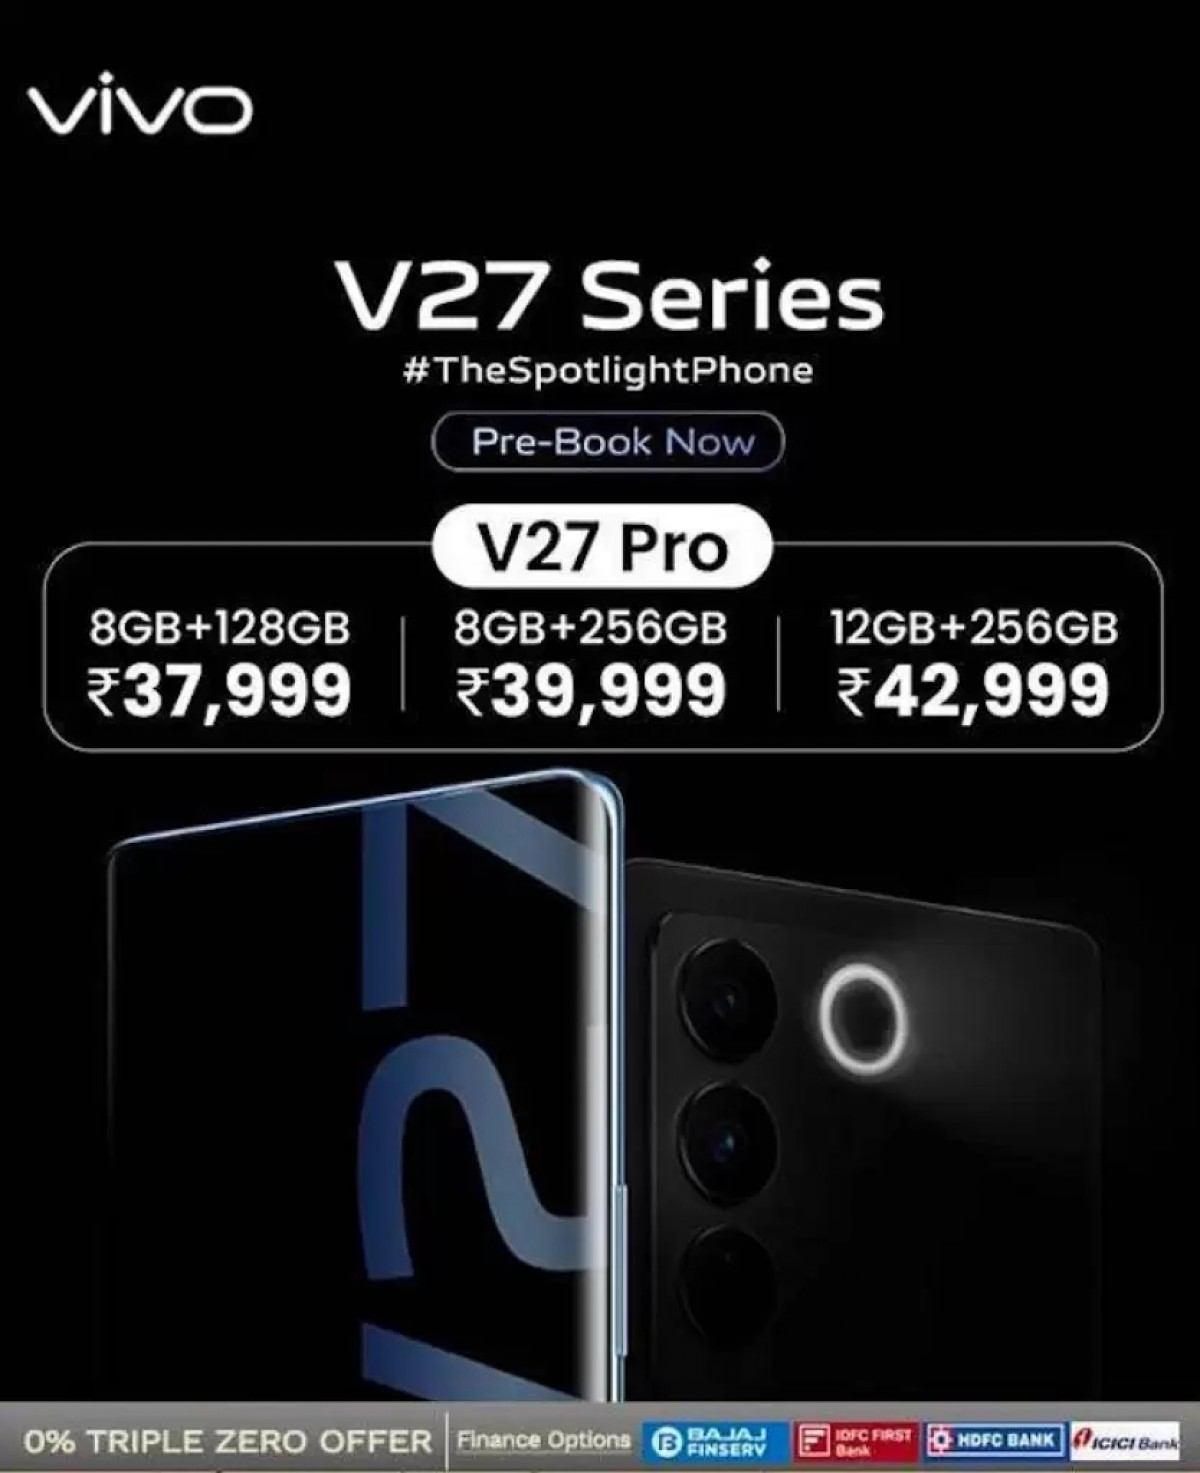 Prices and specifications of the vivo V27 Pro phone leak before its launch